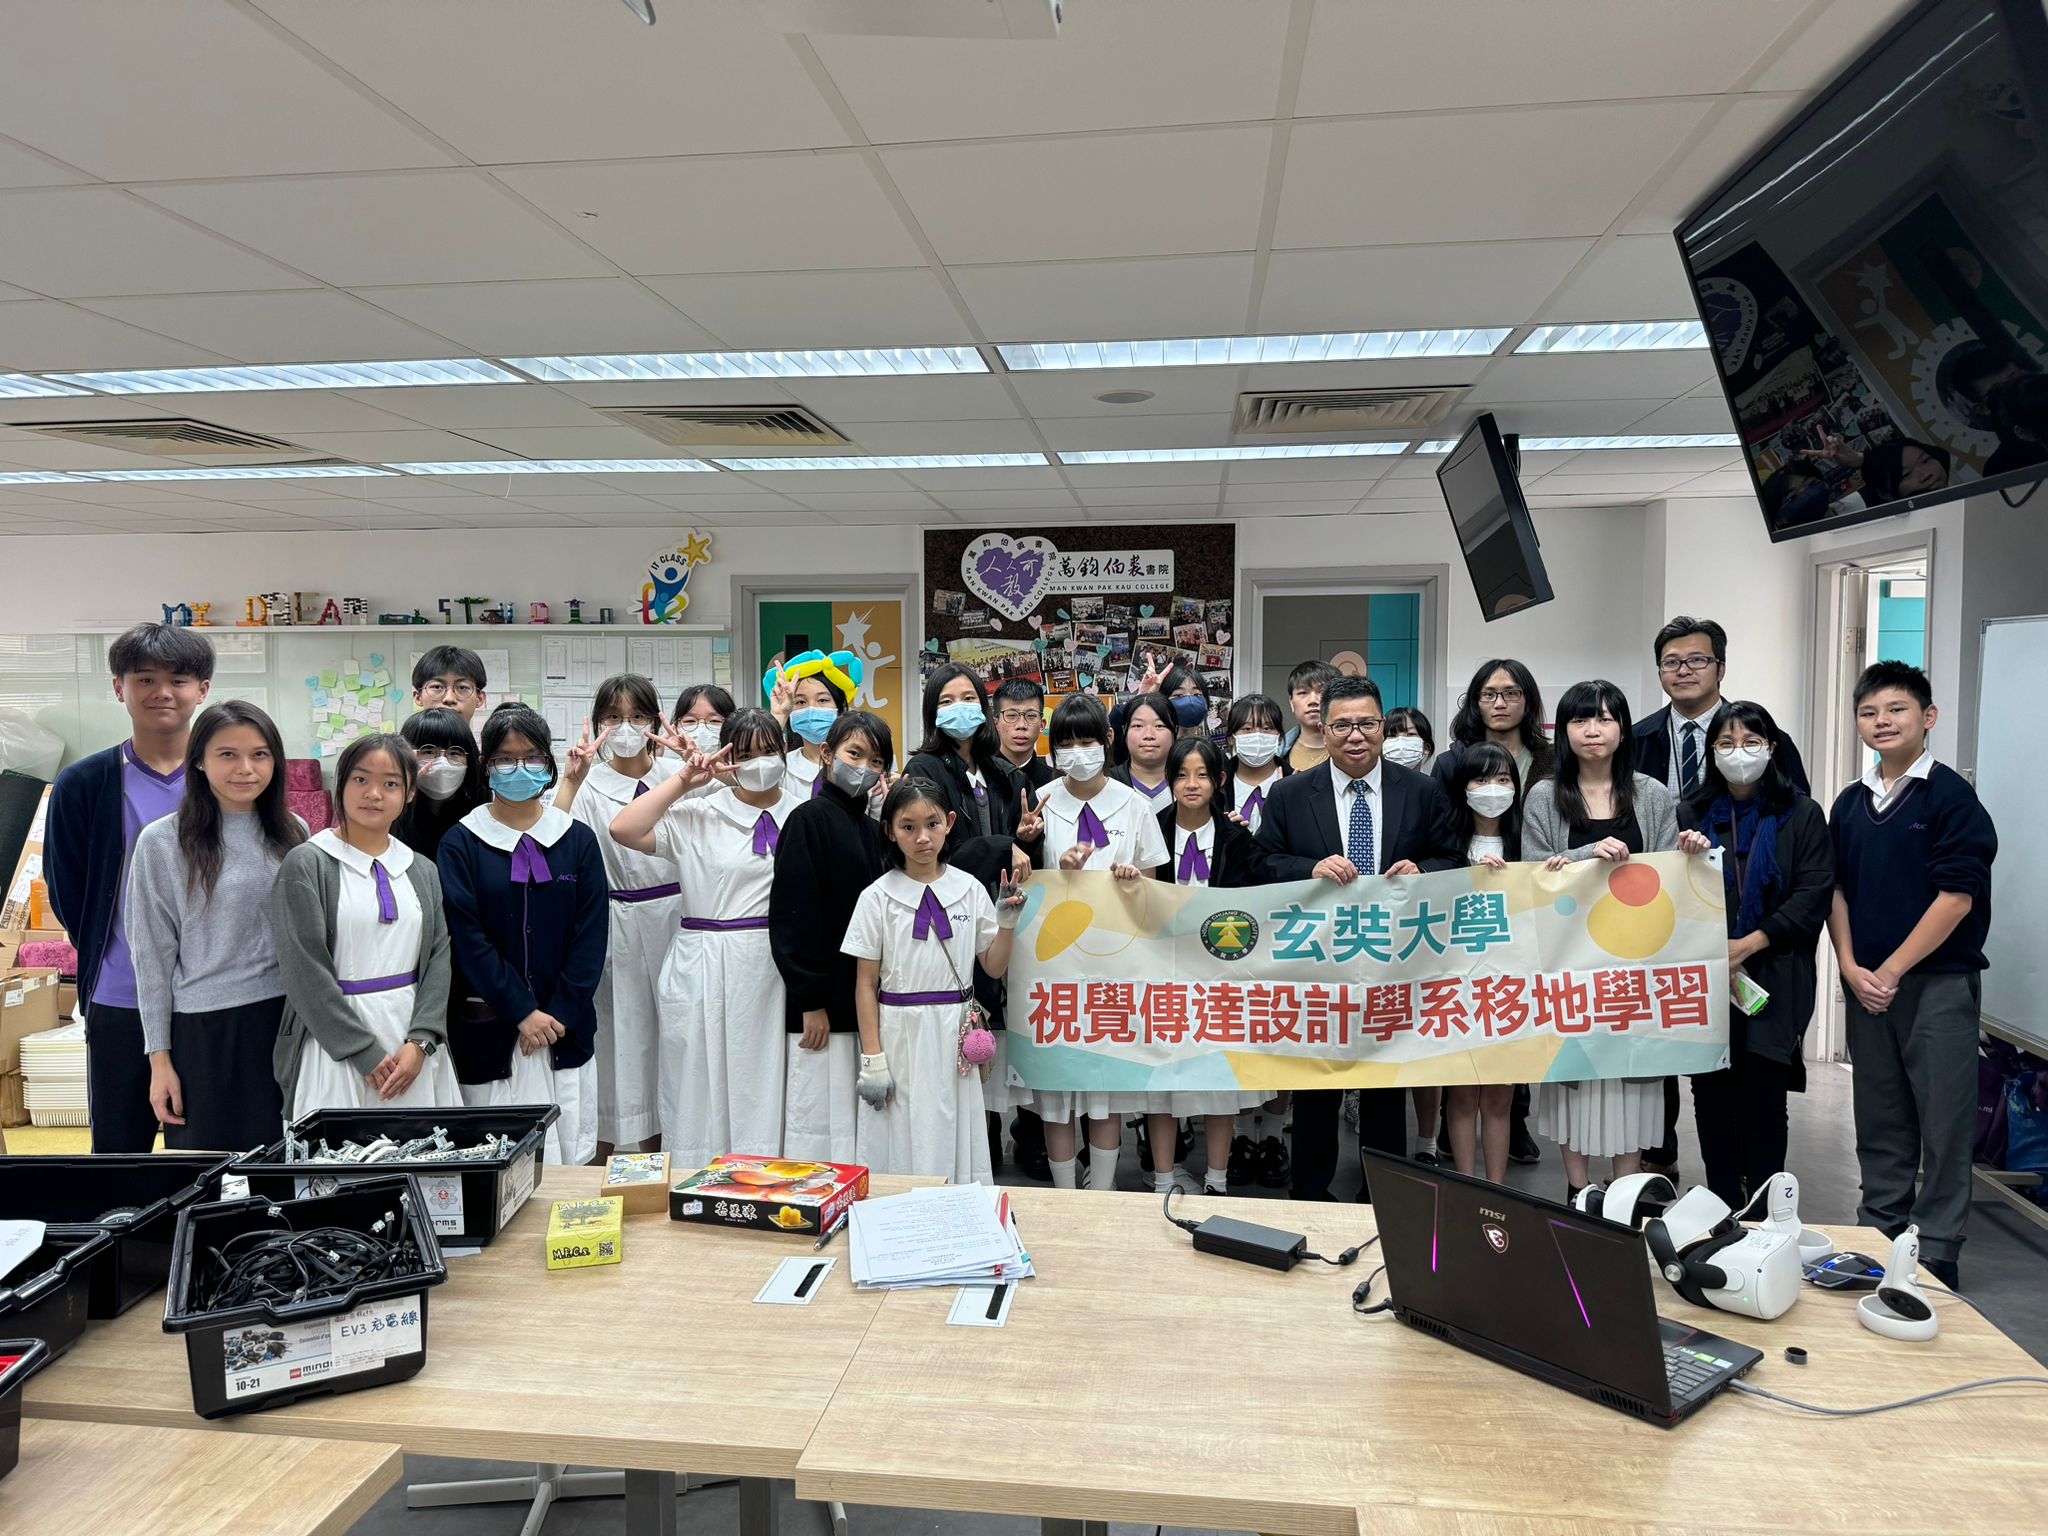 School visit by the Representatives from Hsuan Chuang University’s Department of Visual Communication Design